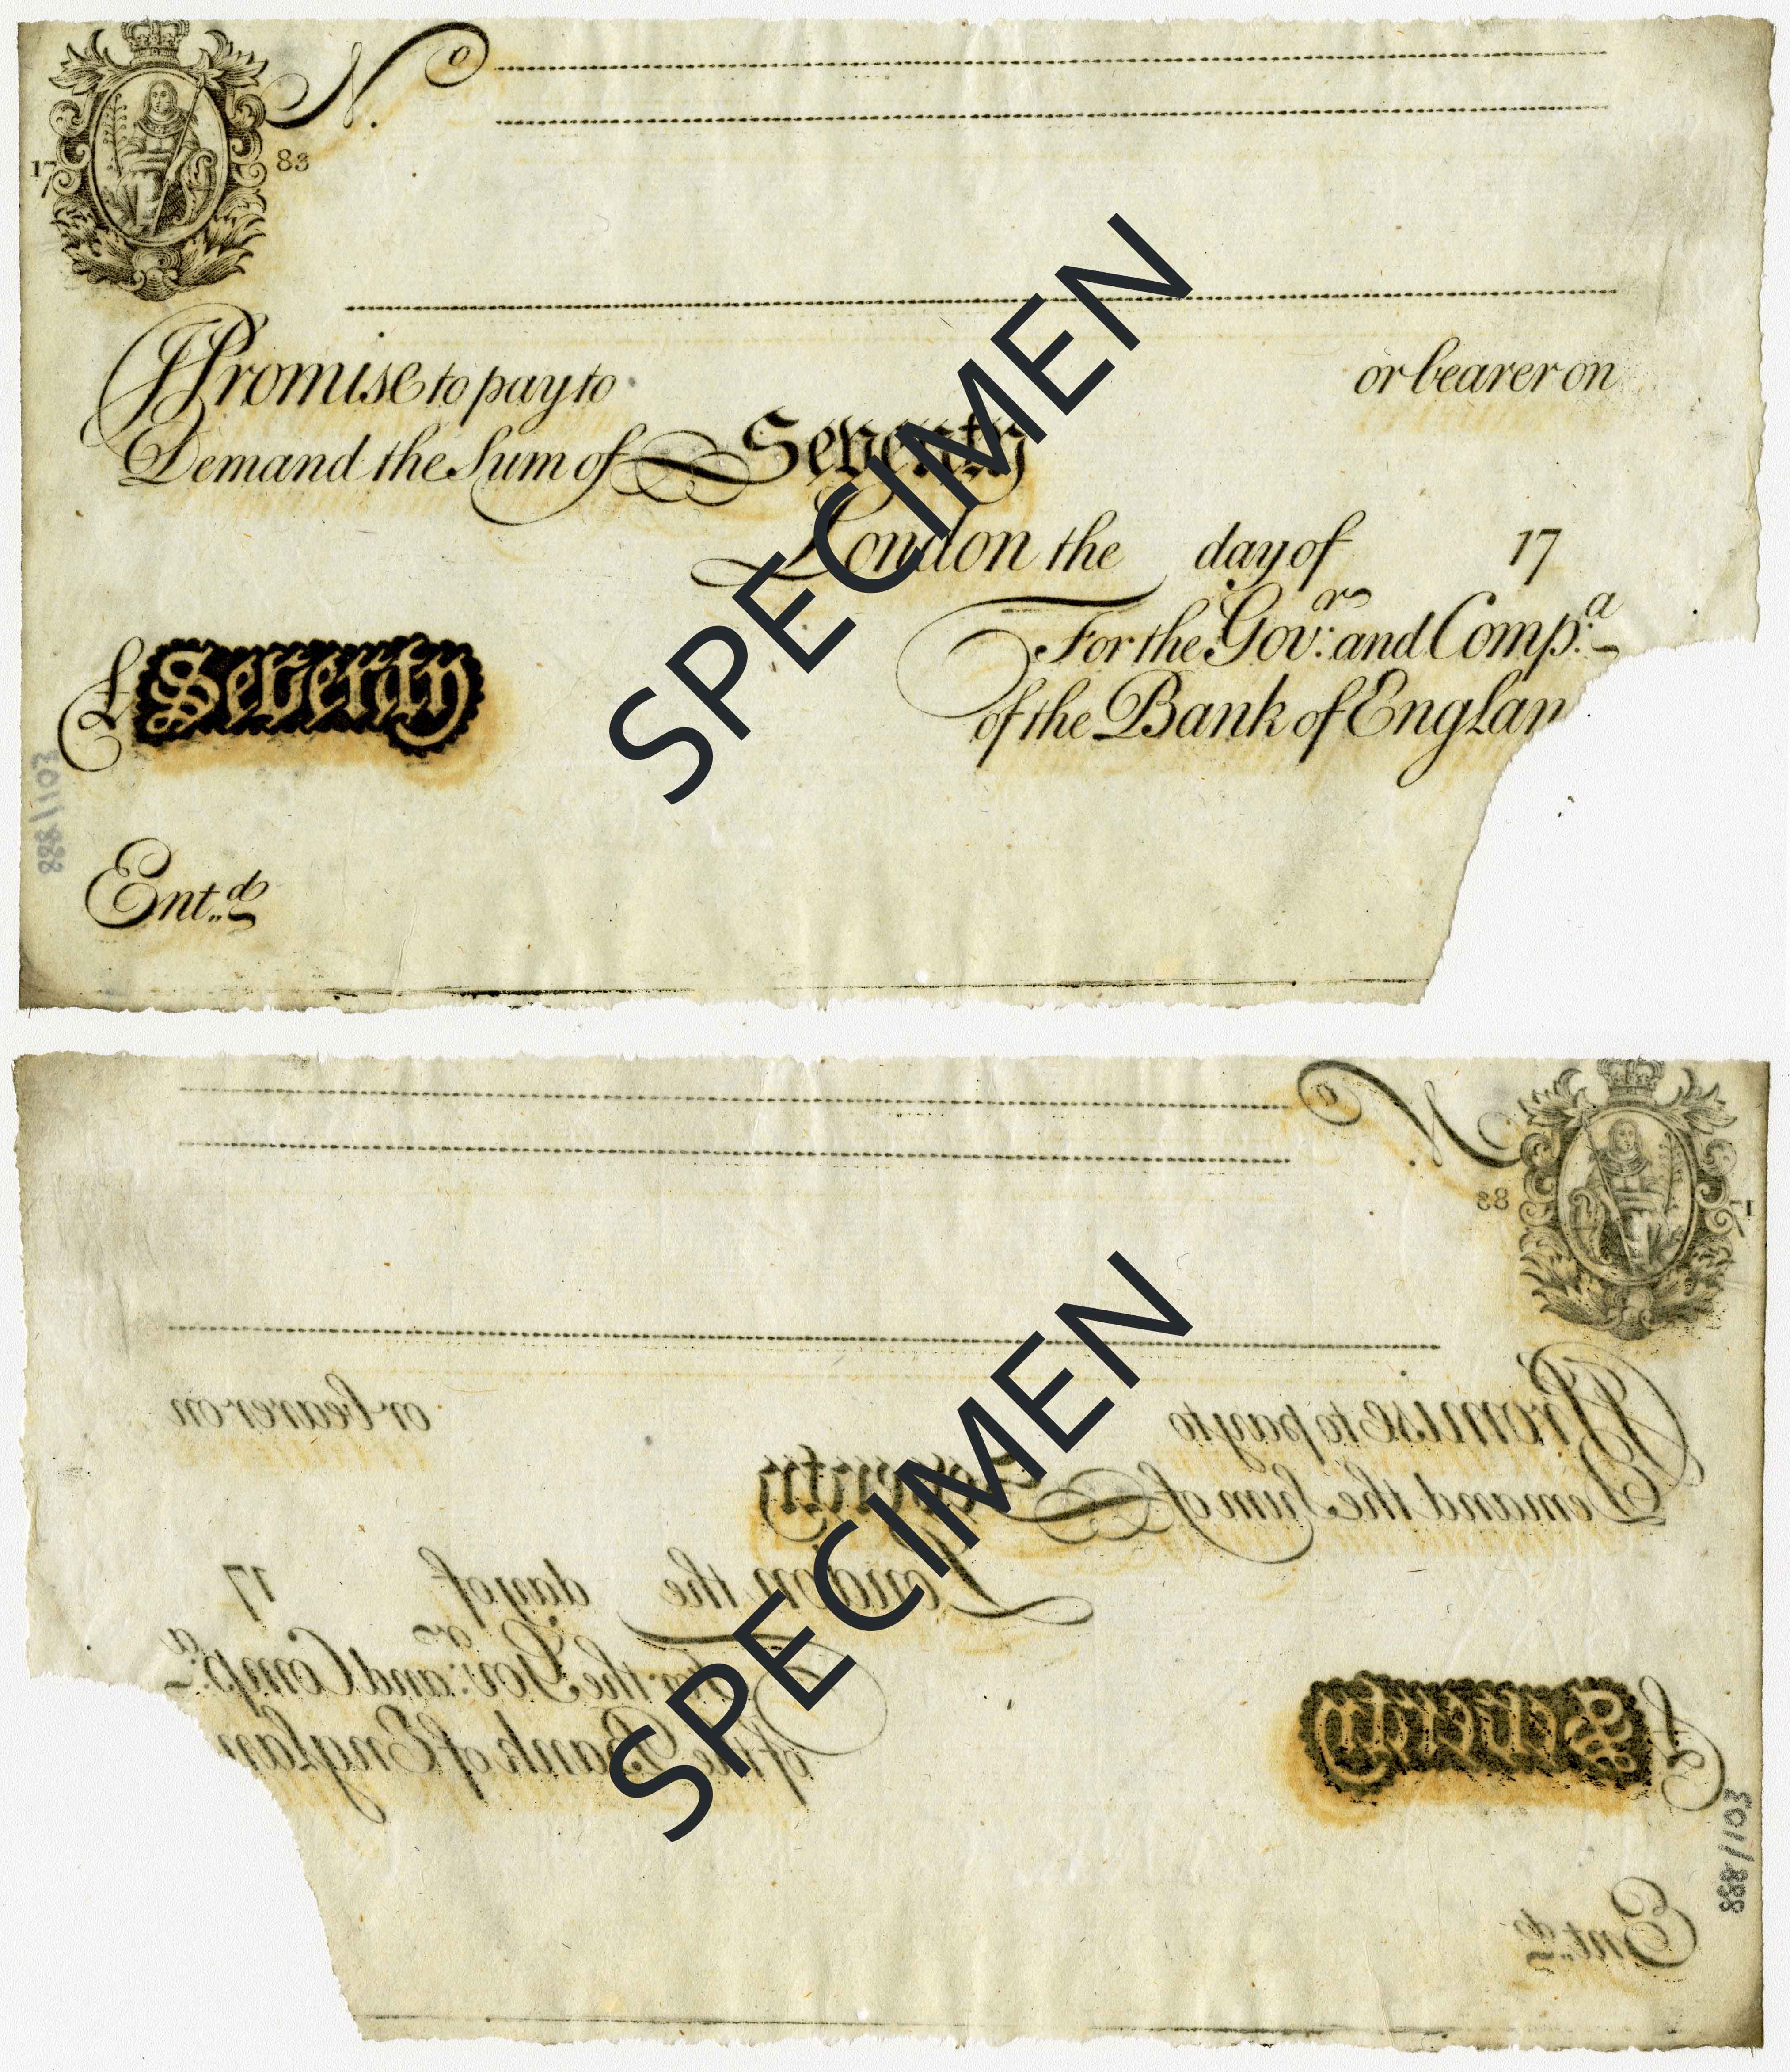 Front and back of note